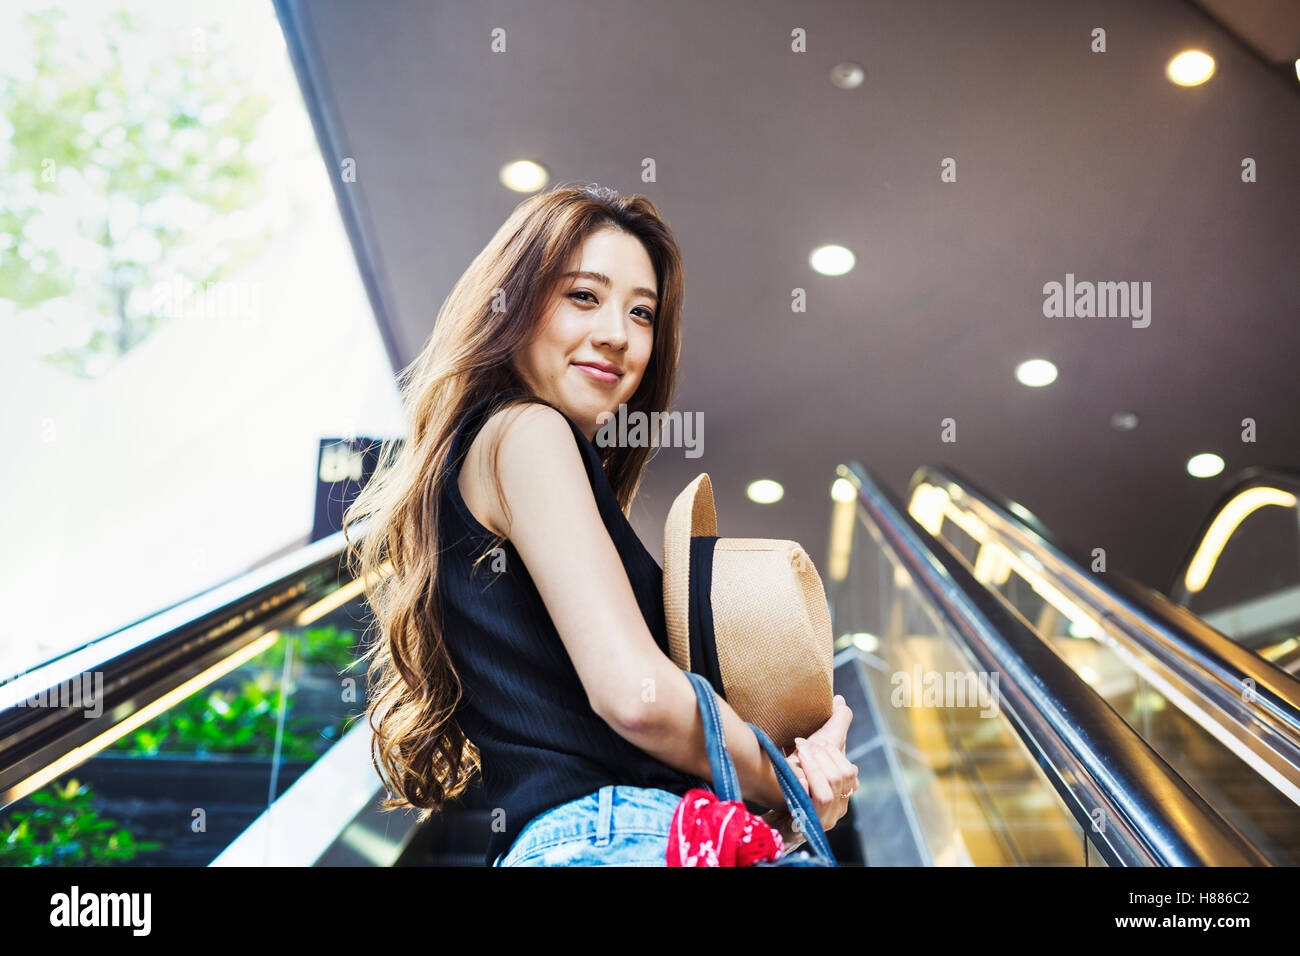 Smiling young woman with long brown hair on an escalator. Stock Photo